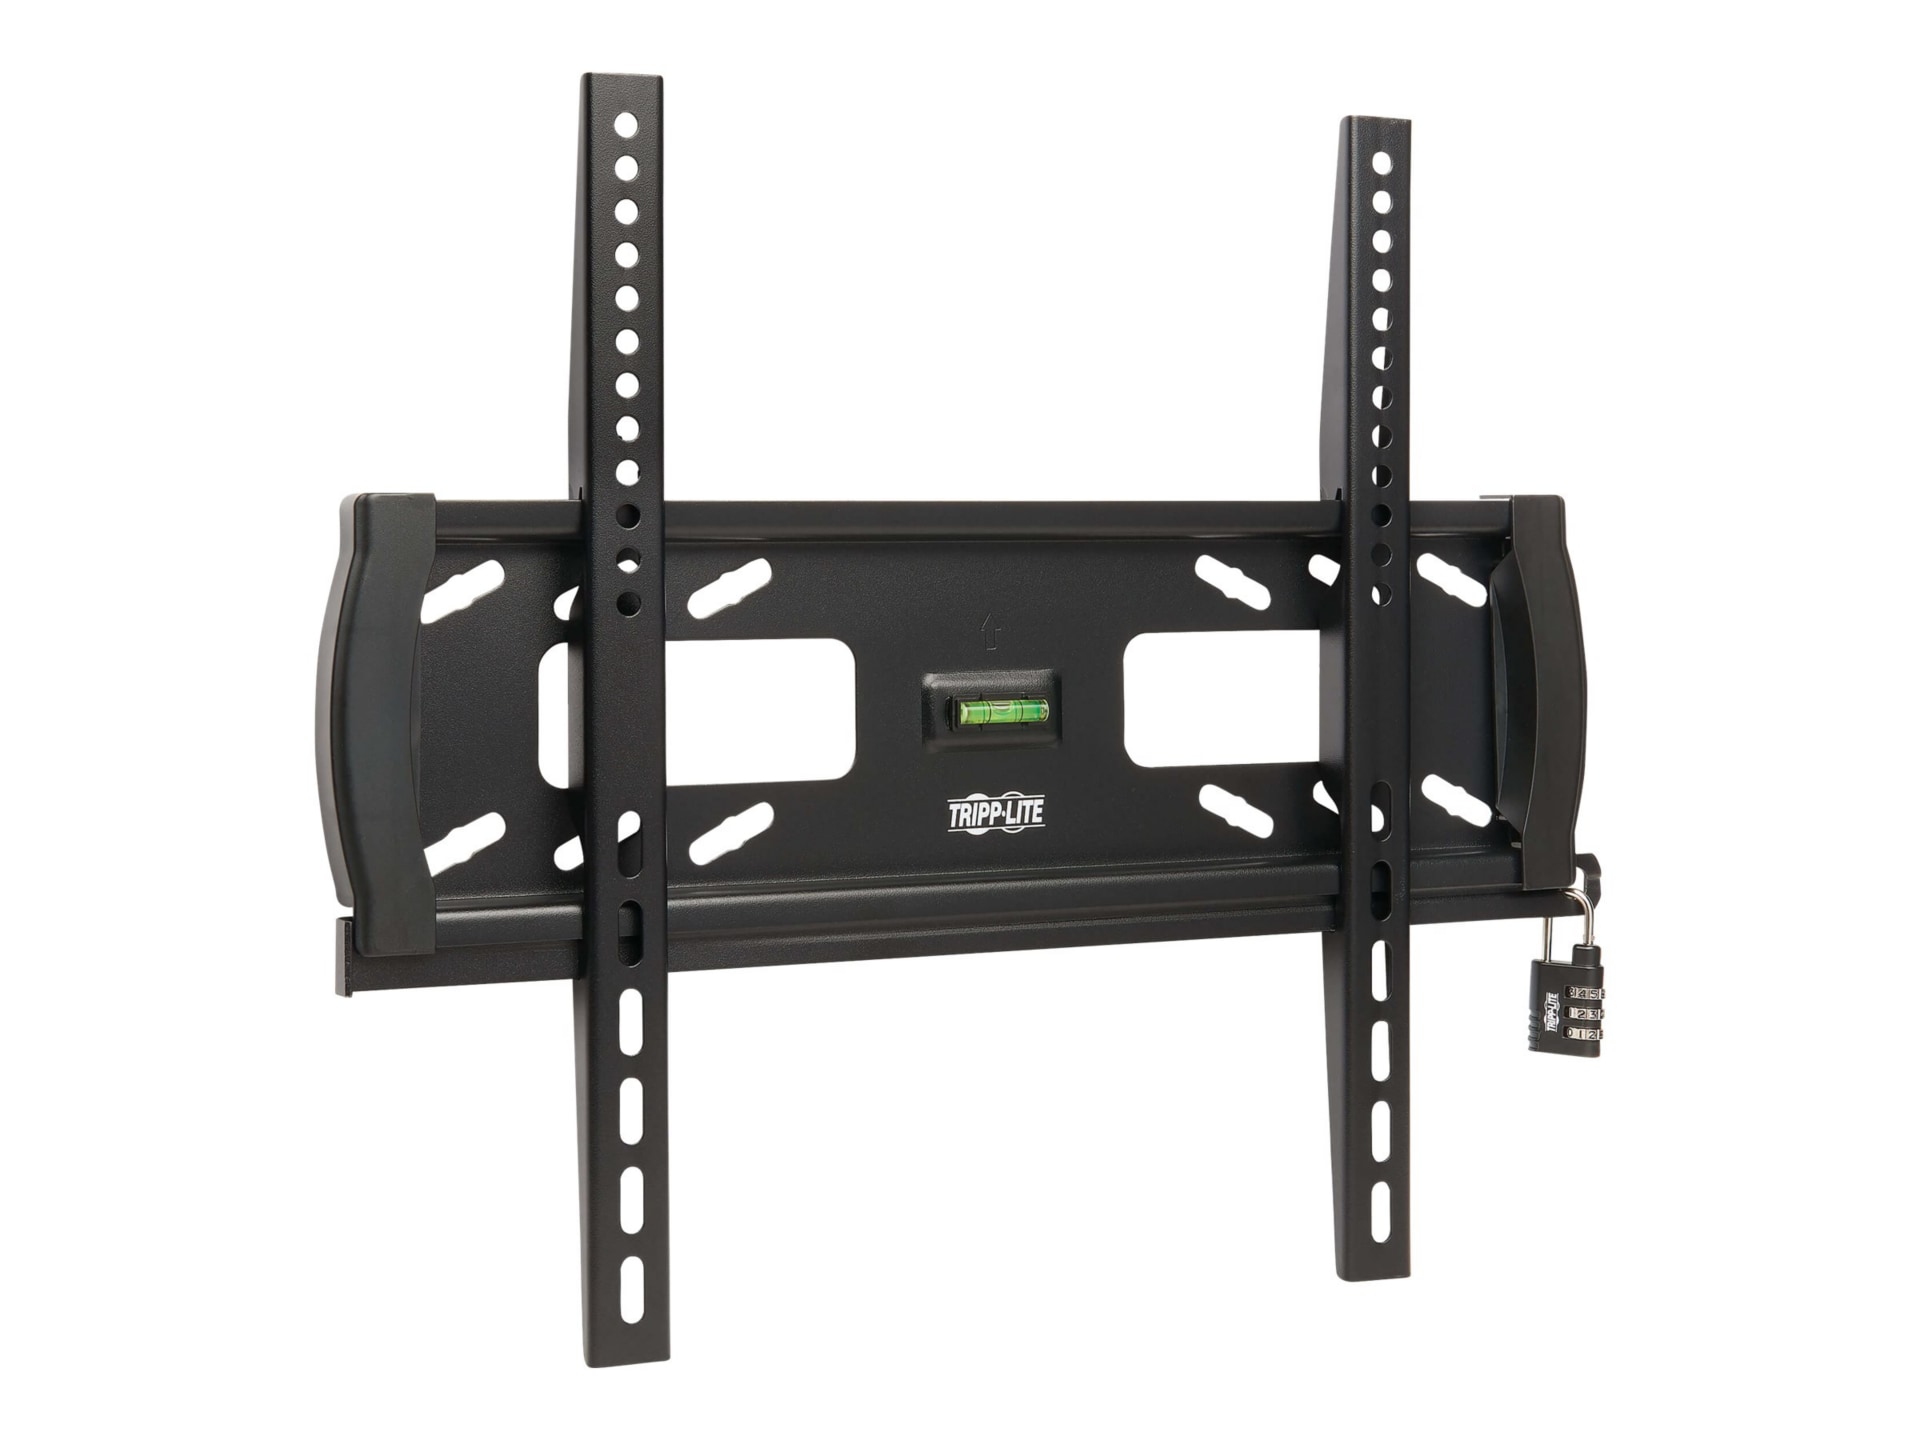 Tripp Lite Heavy-Duty Fixed Security Display TV Wall Mount for 32" to 55" TVs and Monitors, Flat or Curved Screens